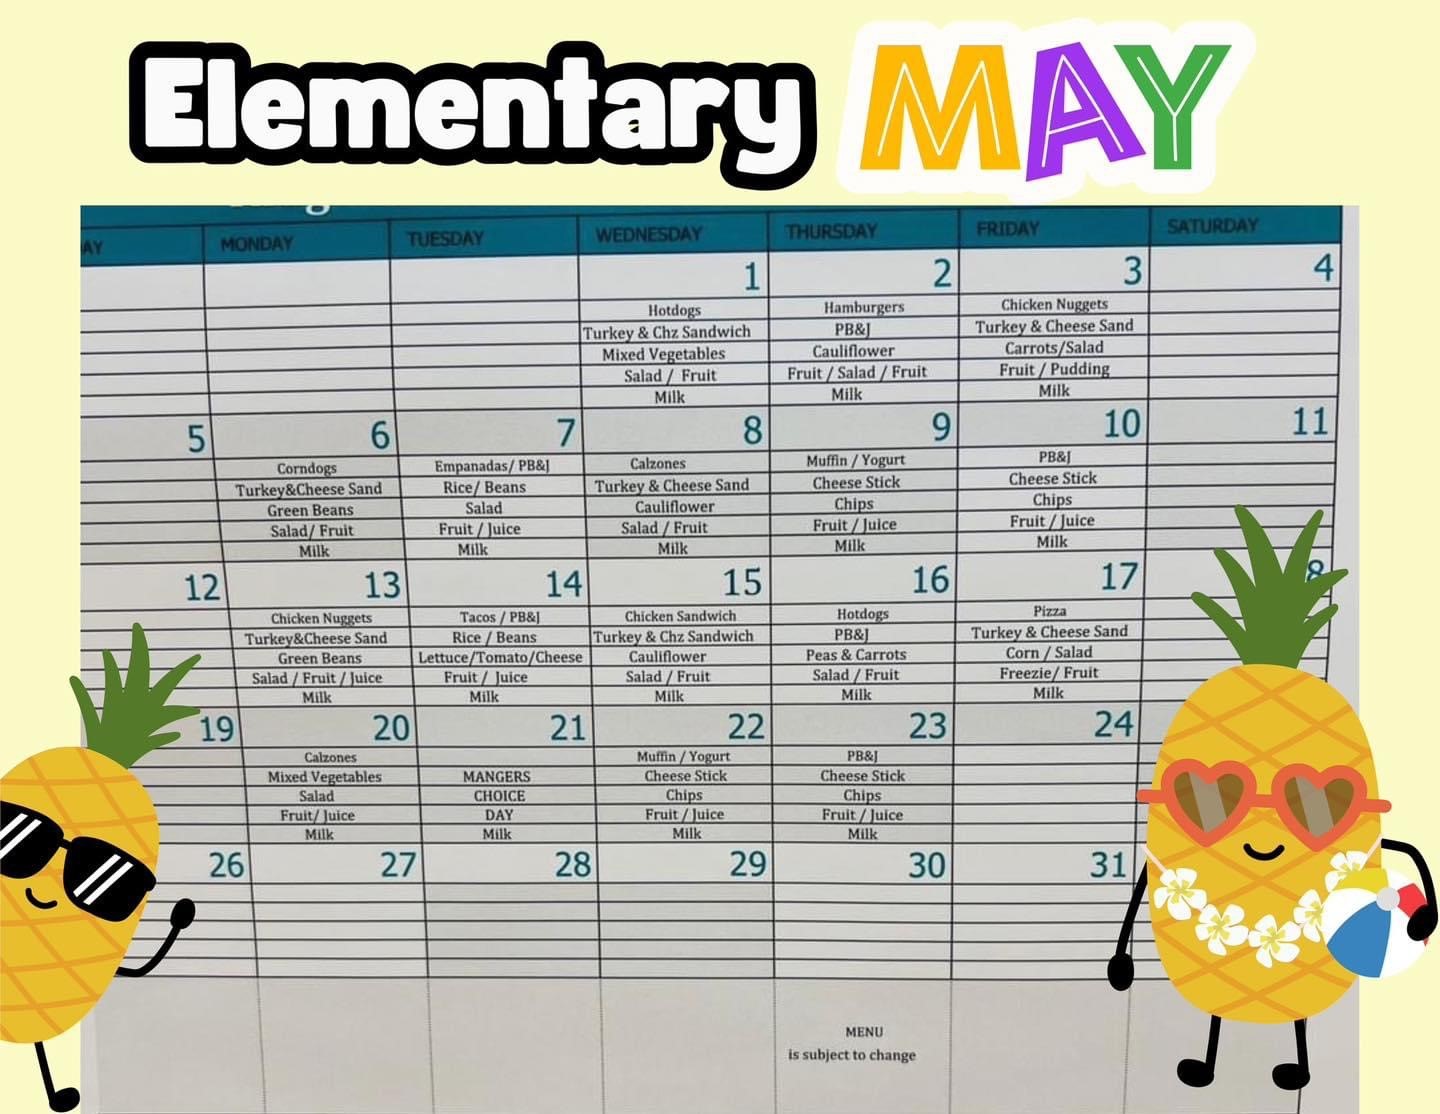 Elementary Lunch Menu - May